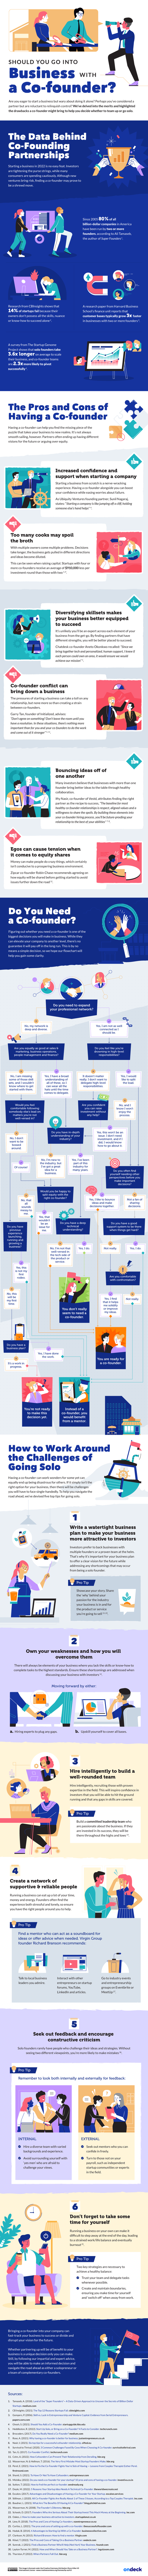 OnDeck infographic on whether you should have a co-founder for your startup